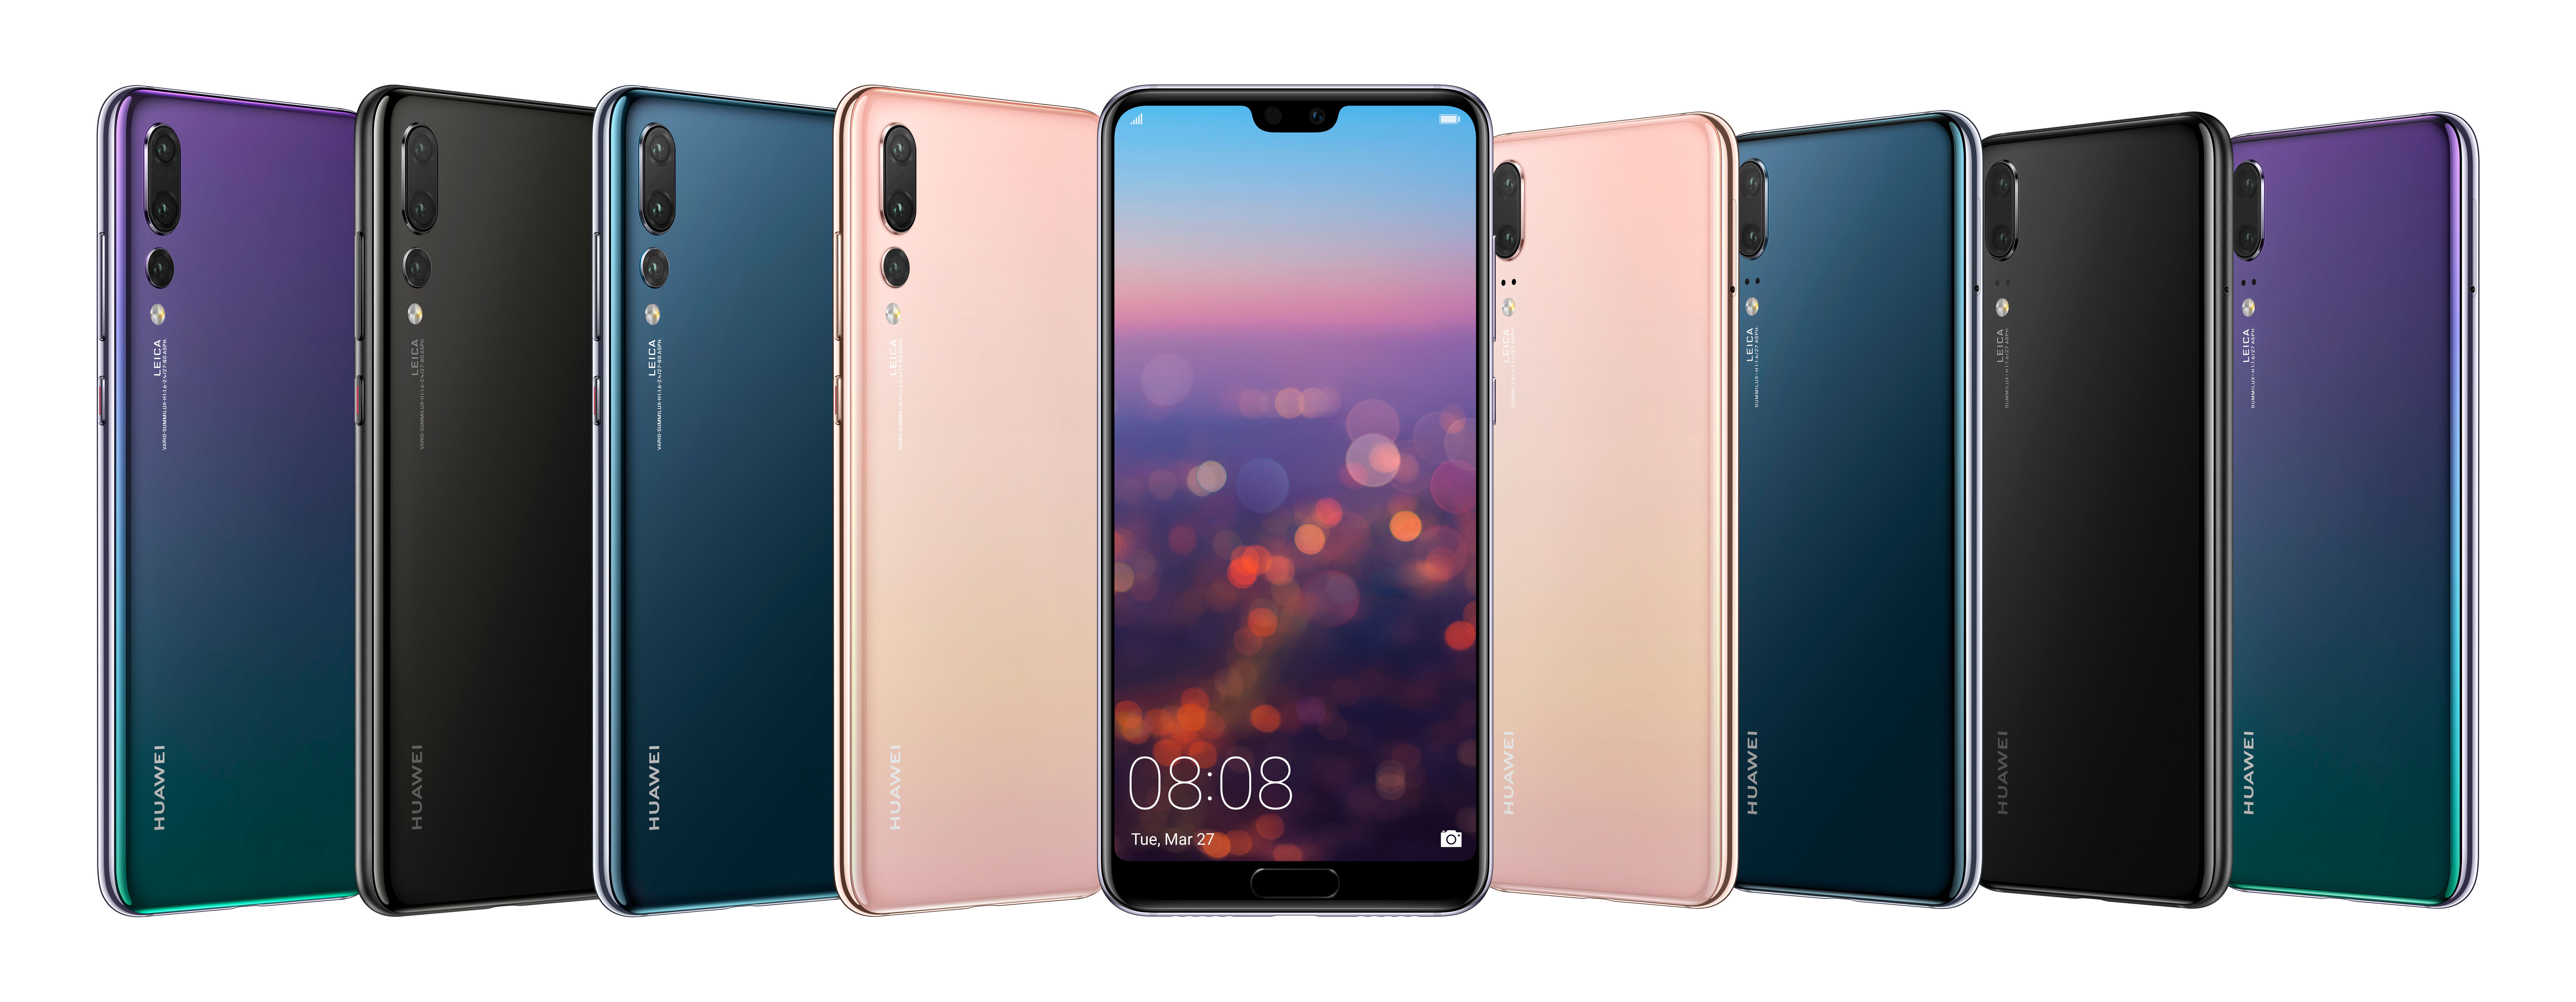 rek Net zo Nauwkeurig Huawei Unveils the HUAWEI P20 and HUAWEI P20 Pro, Breakthroughs in  Technology and Art to Redefine Intelligent Photography | Business Wire